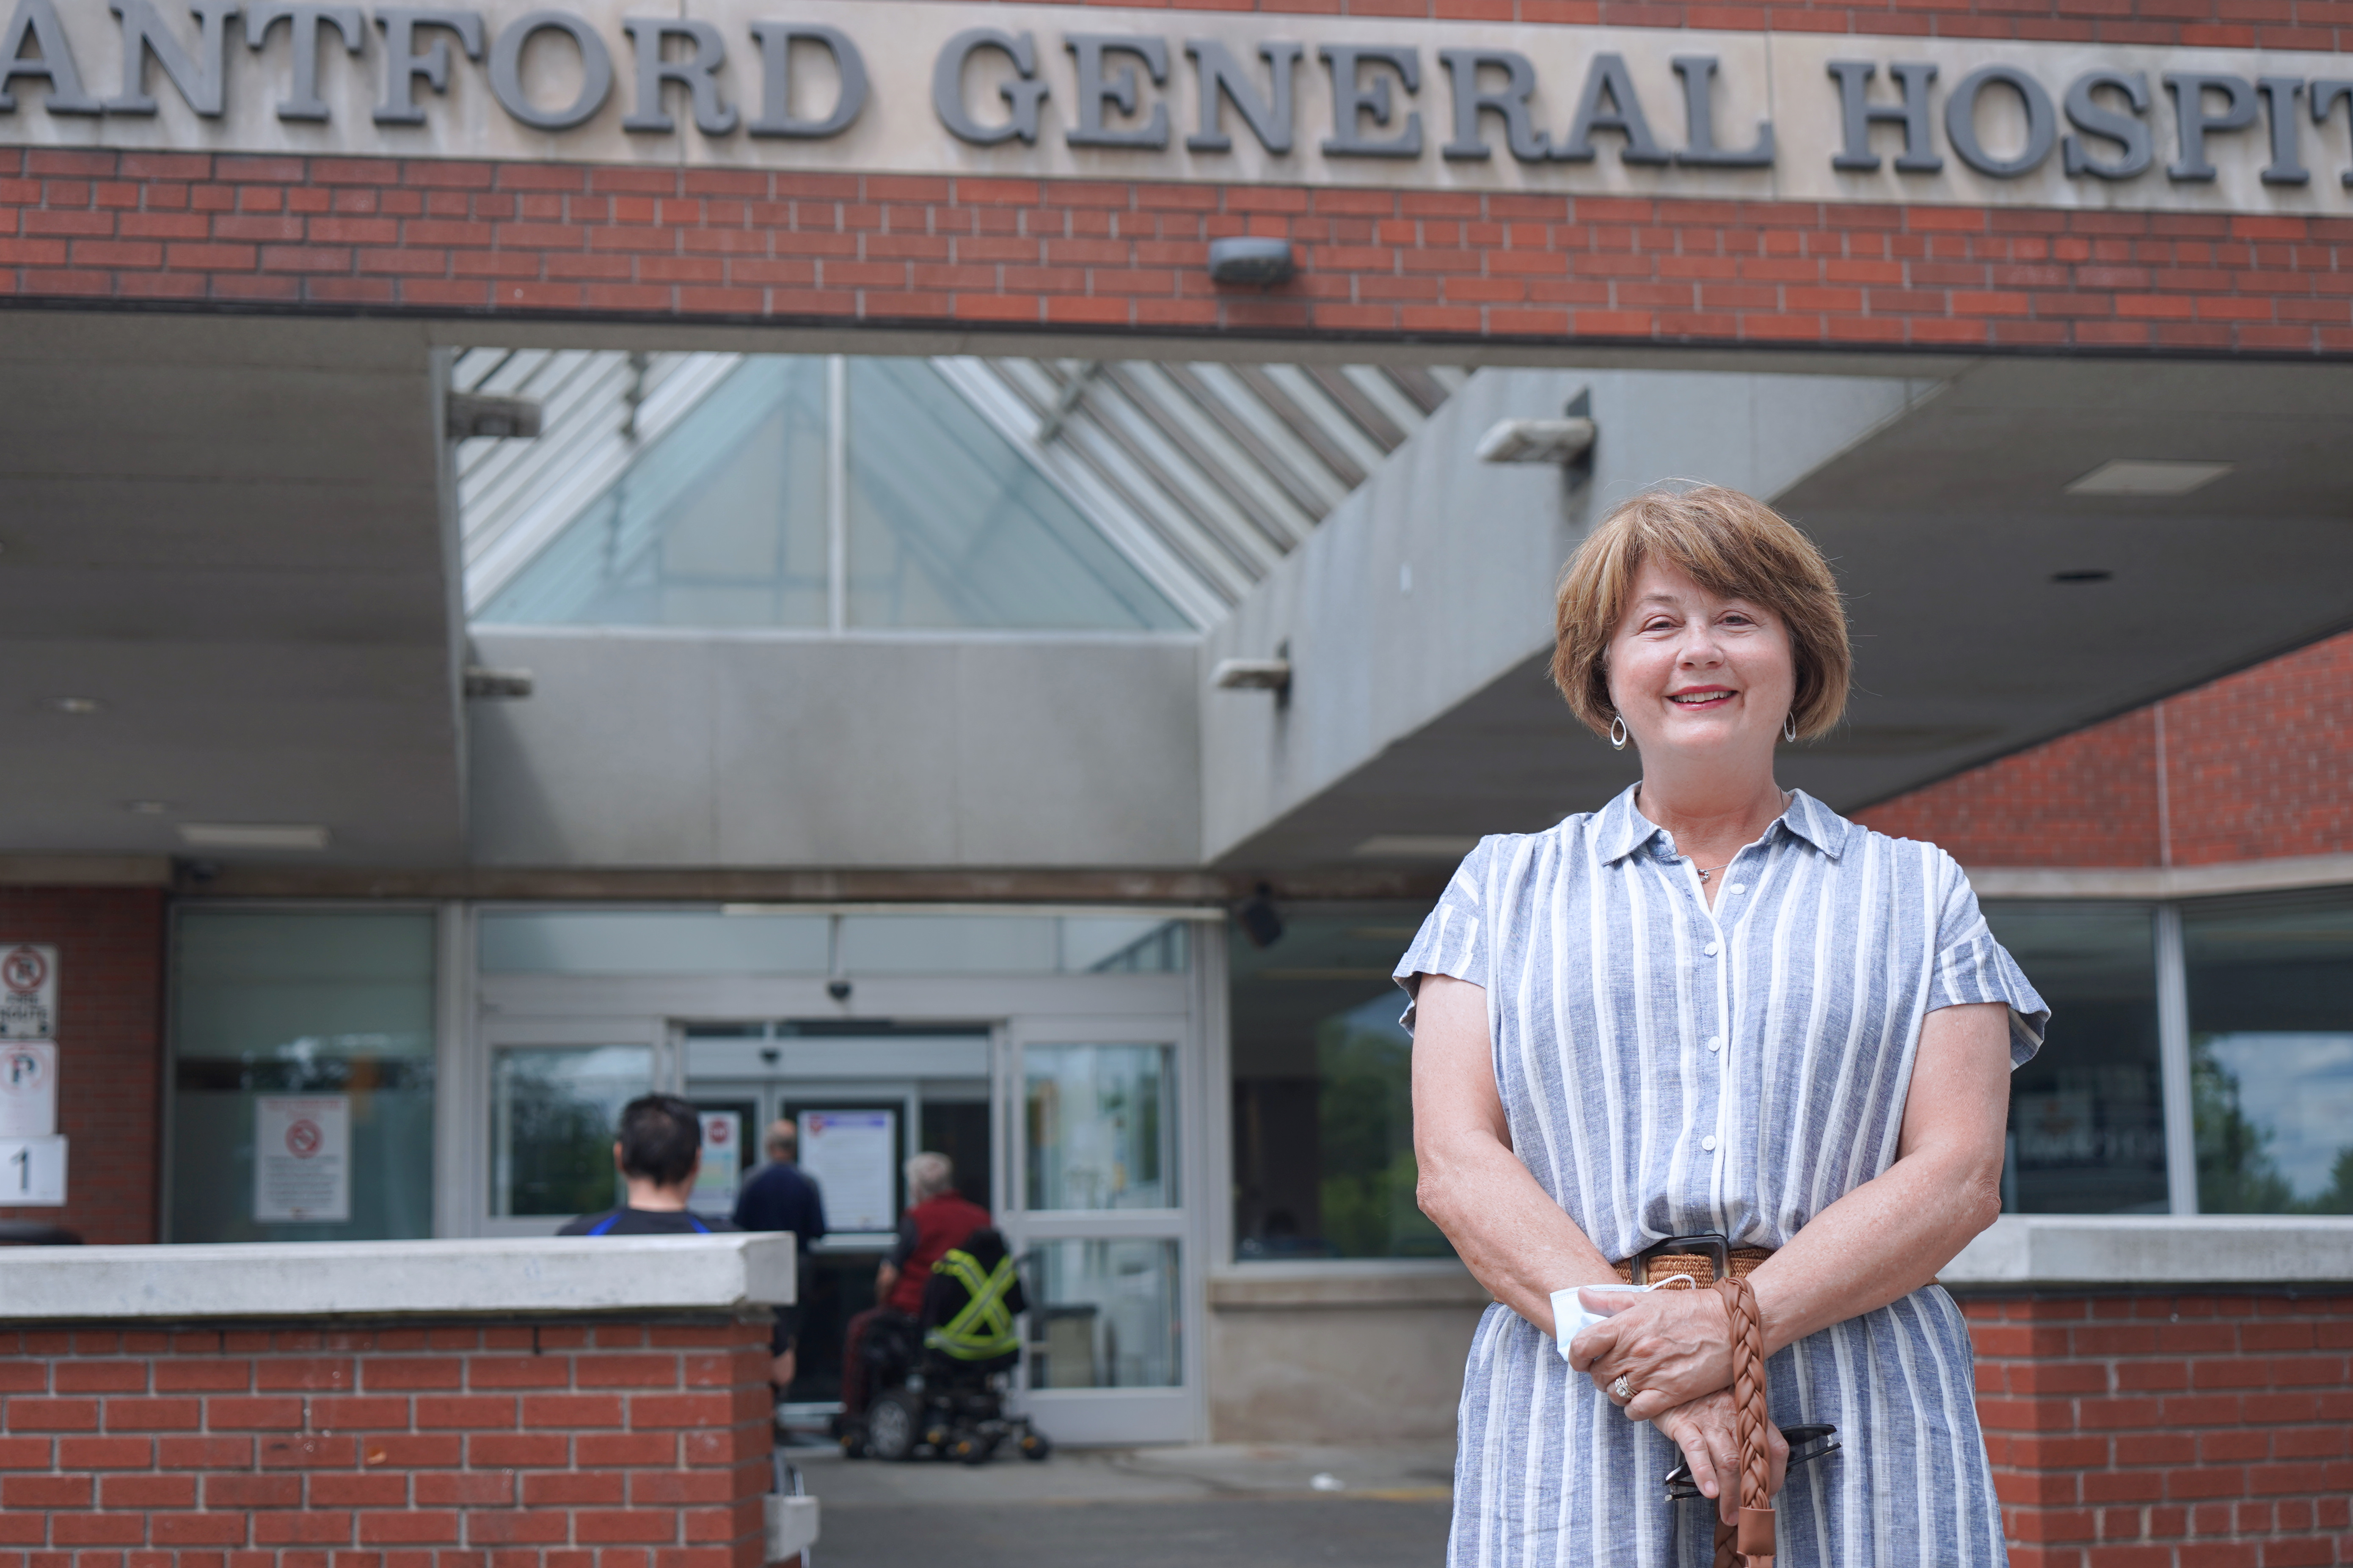 Mary Jane Savory retires from BGH after 42 years